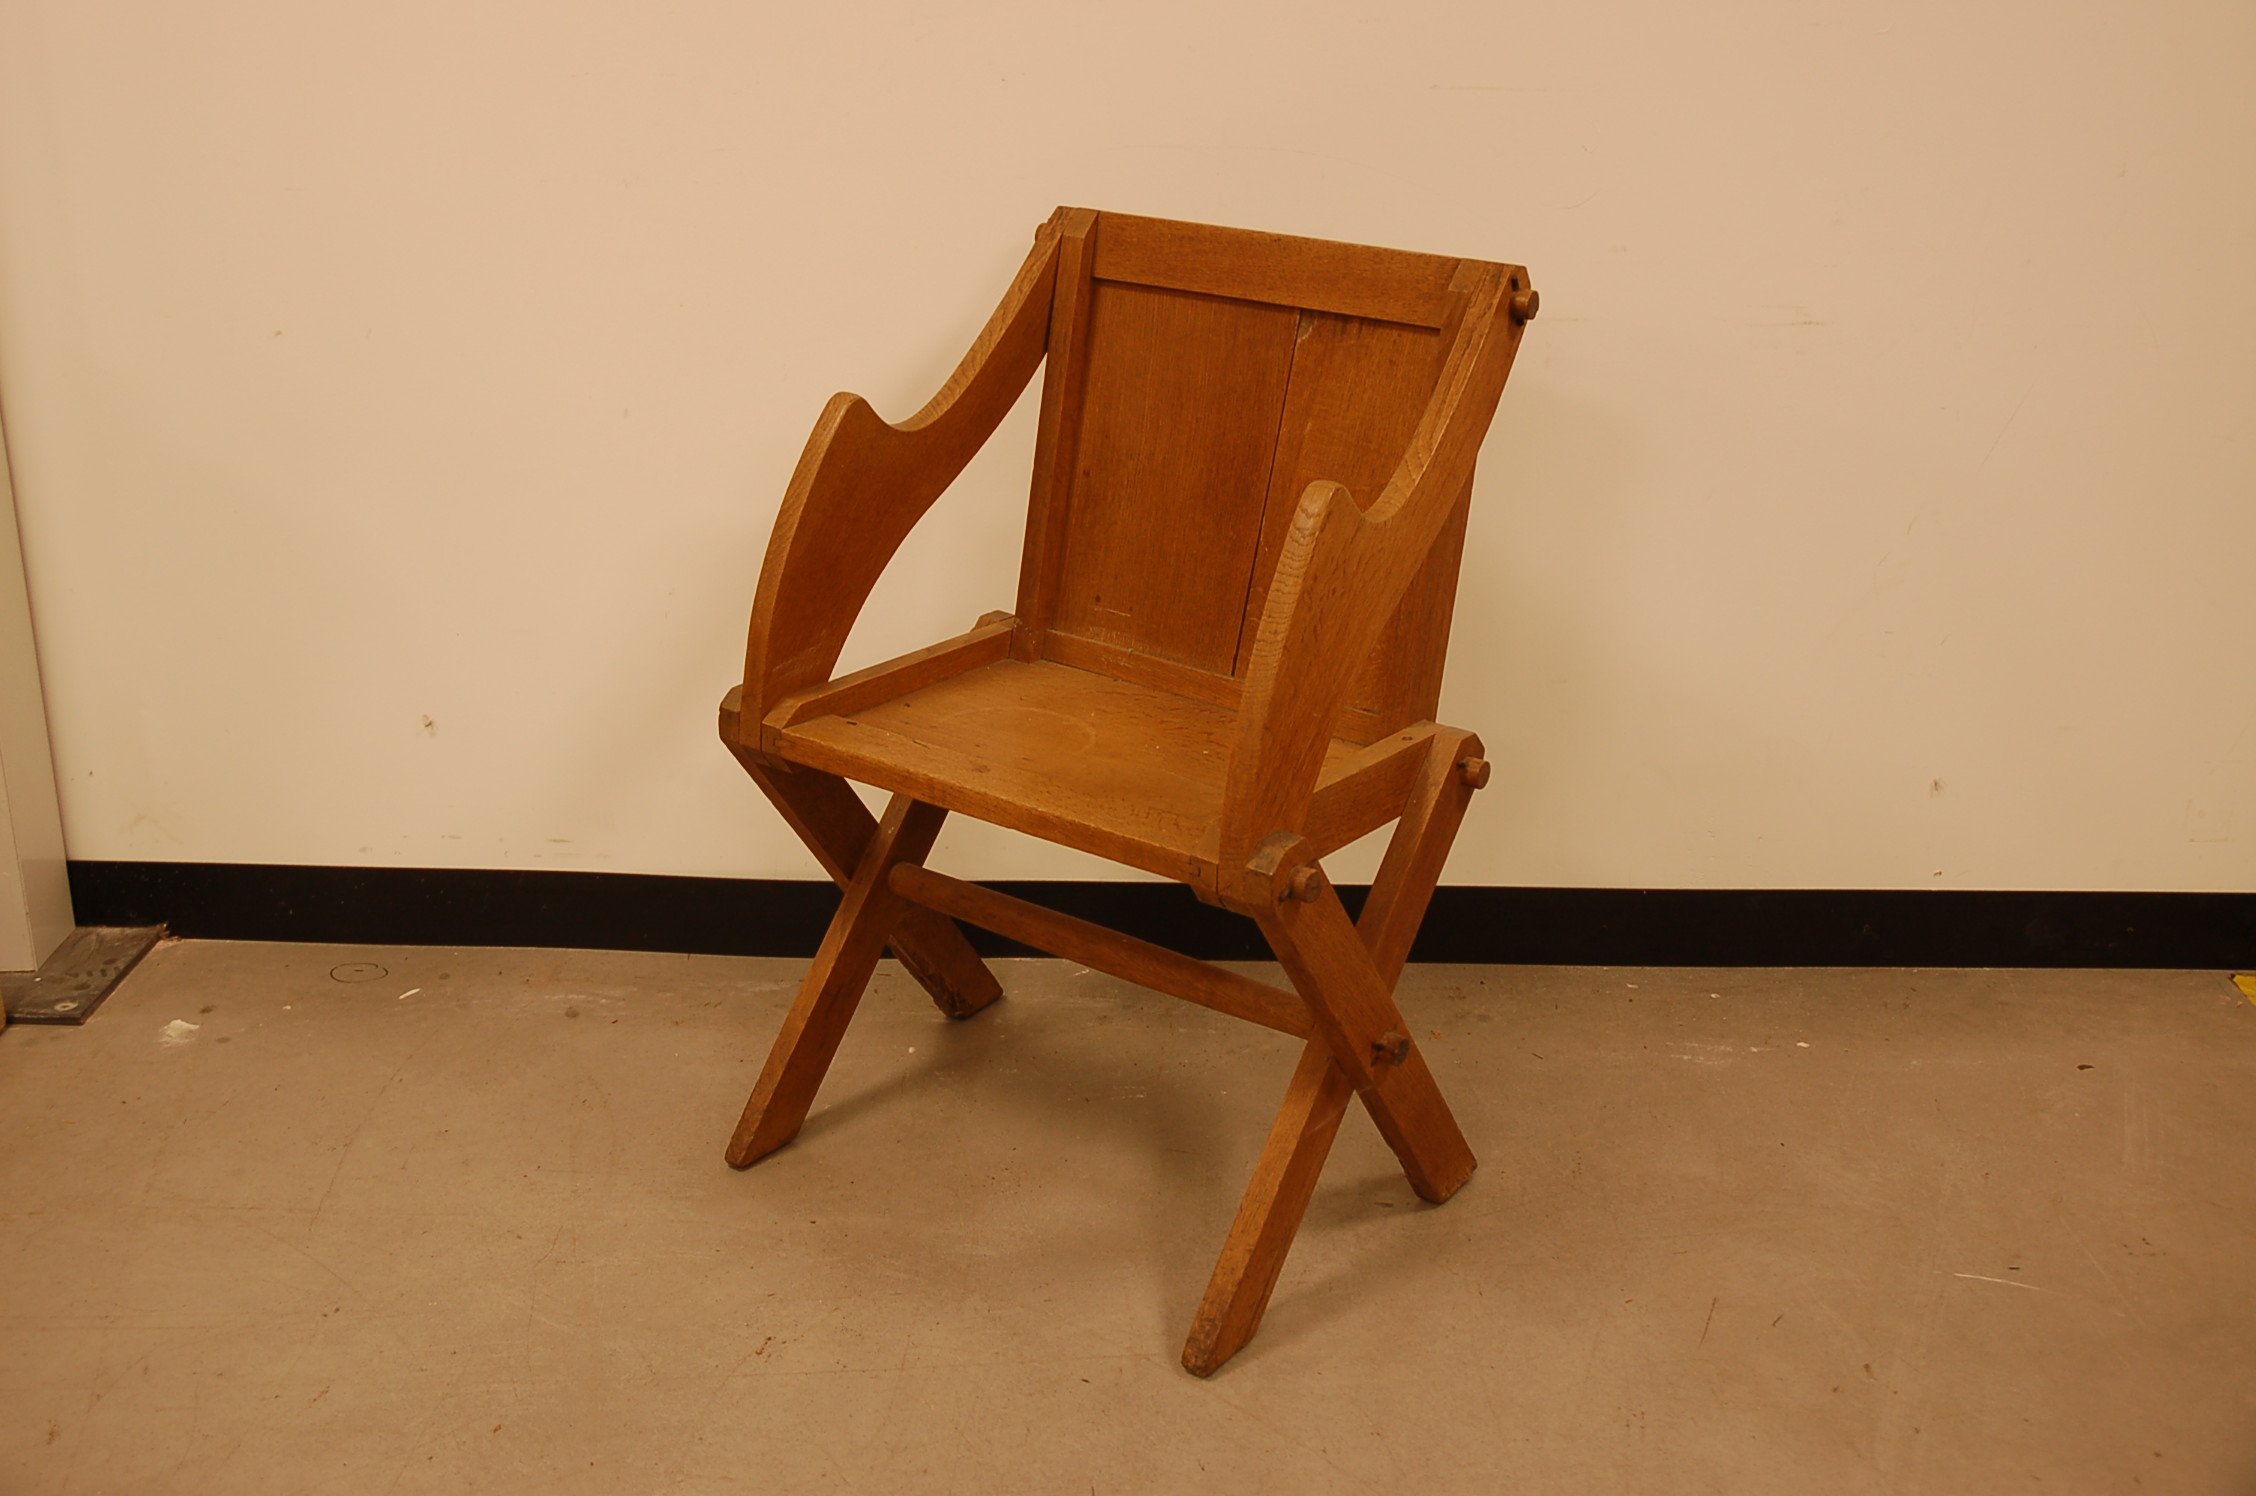 An early 20th century light oak Priests chair